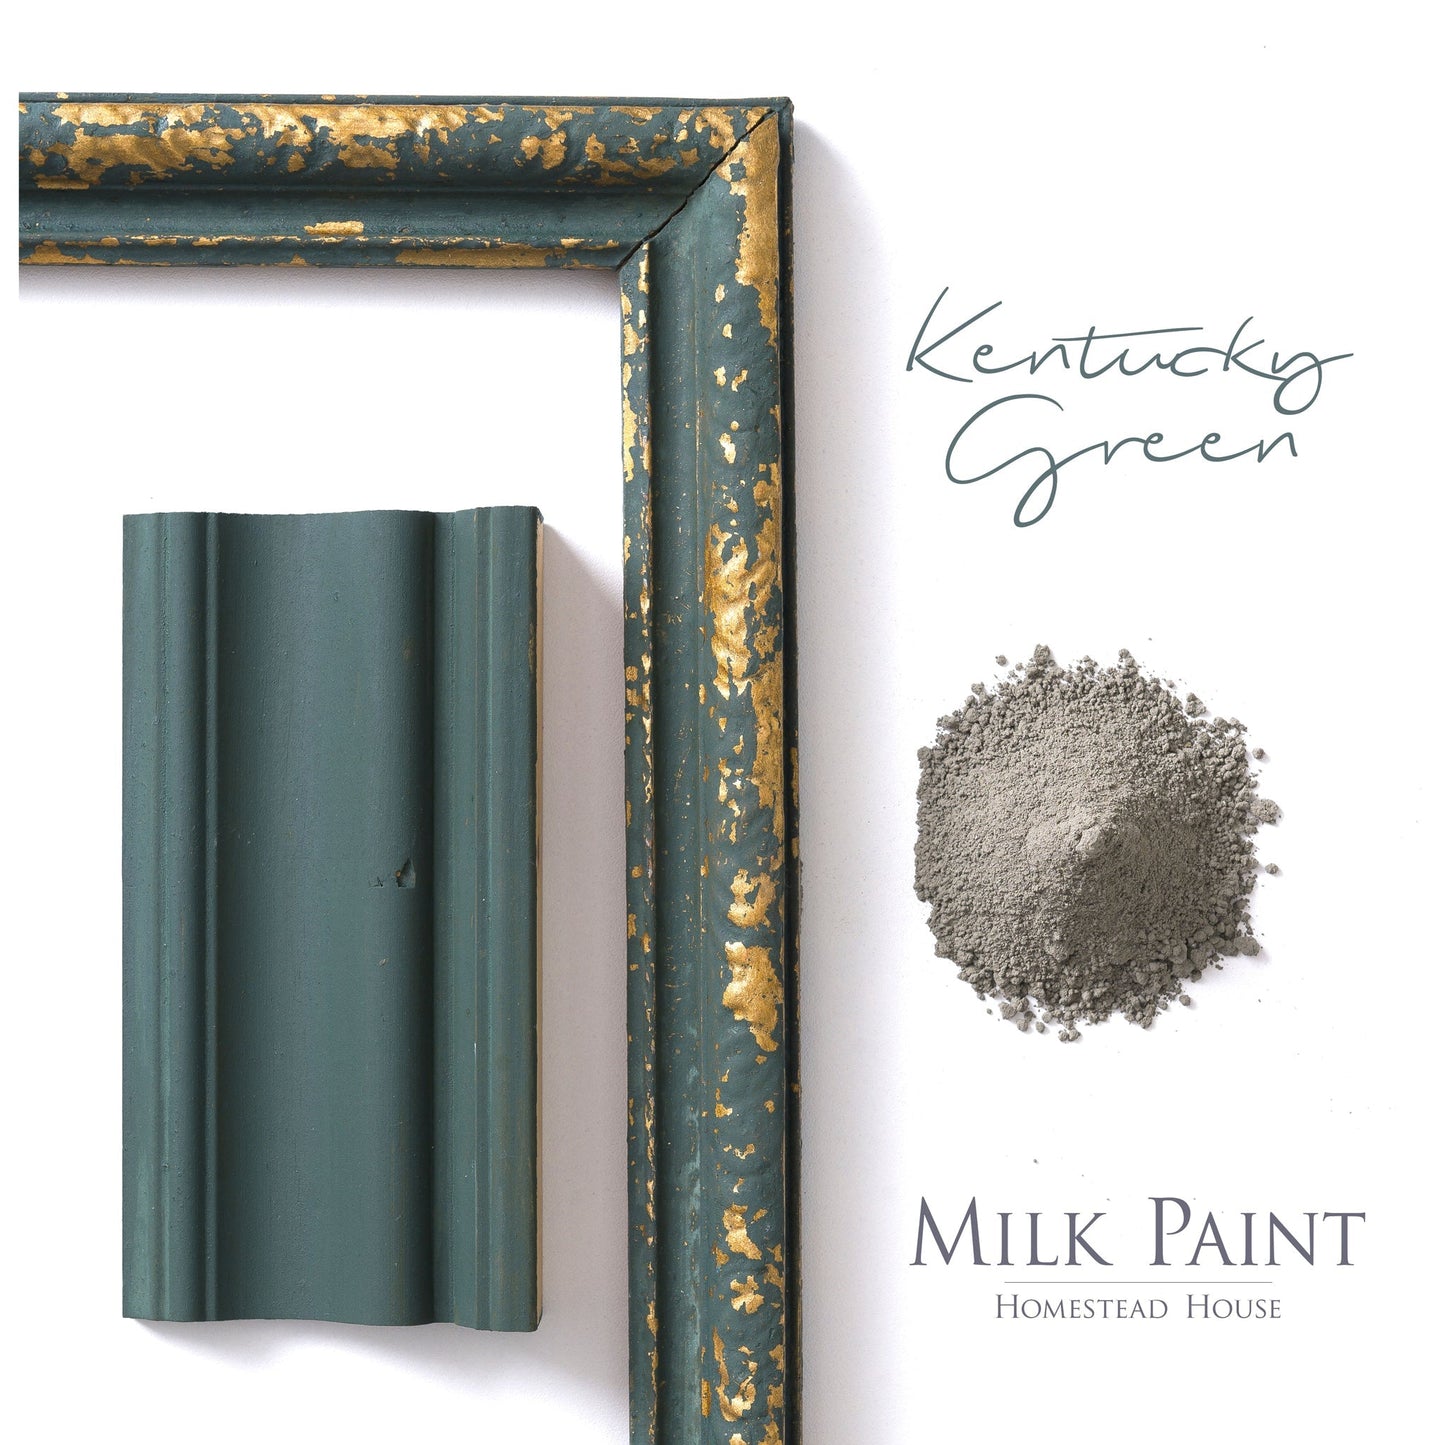 Milk Paint from Homestead House in Kentucky Green, A dark, rich green with a slight blue tone. | homesteadhouse.ca